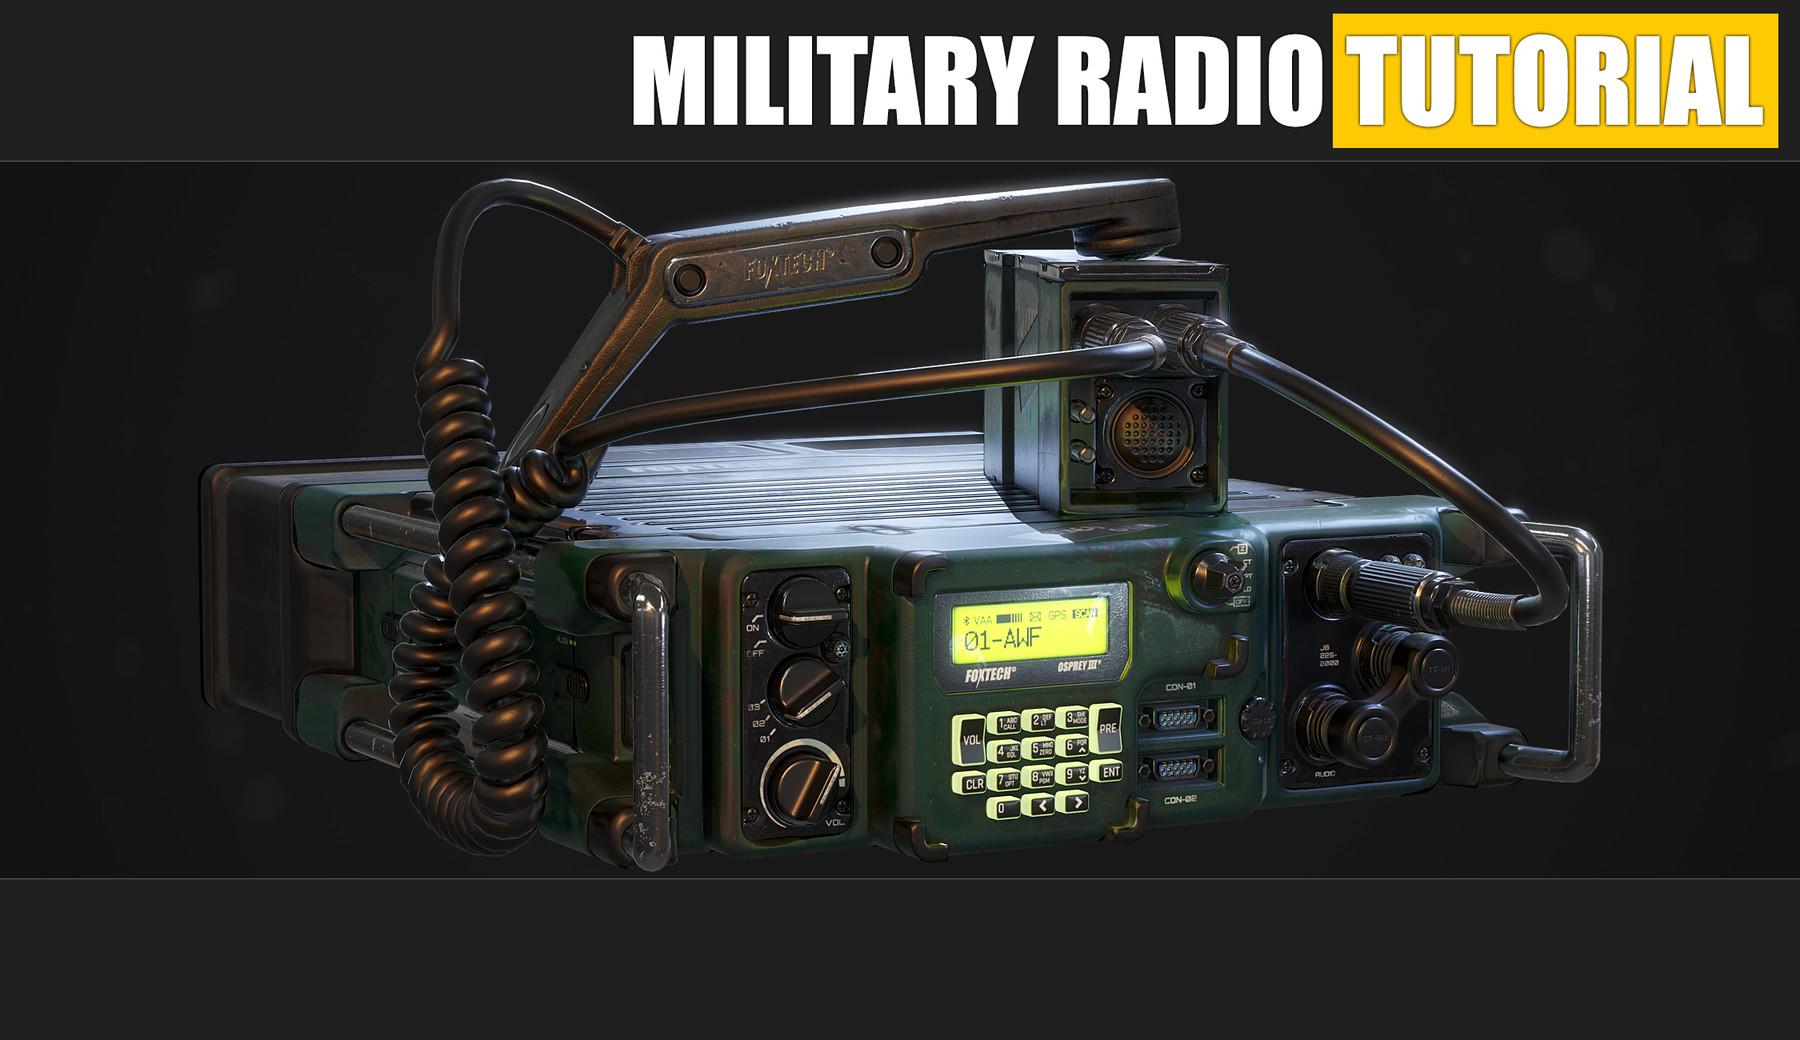 ArtStation - Military Radio Tutorial - Maya and Substance Painter - Master  modeling and texturing and create a game ready Prop | Tutorials